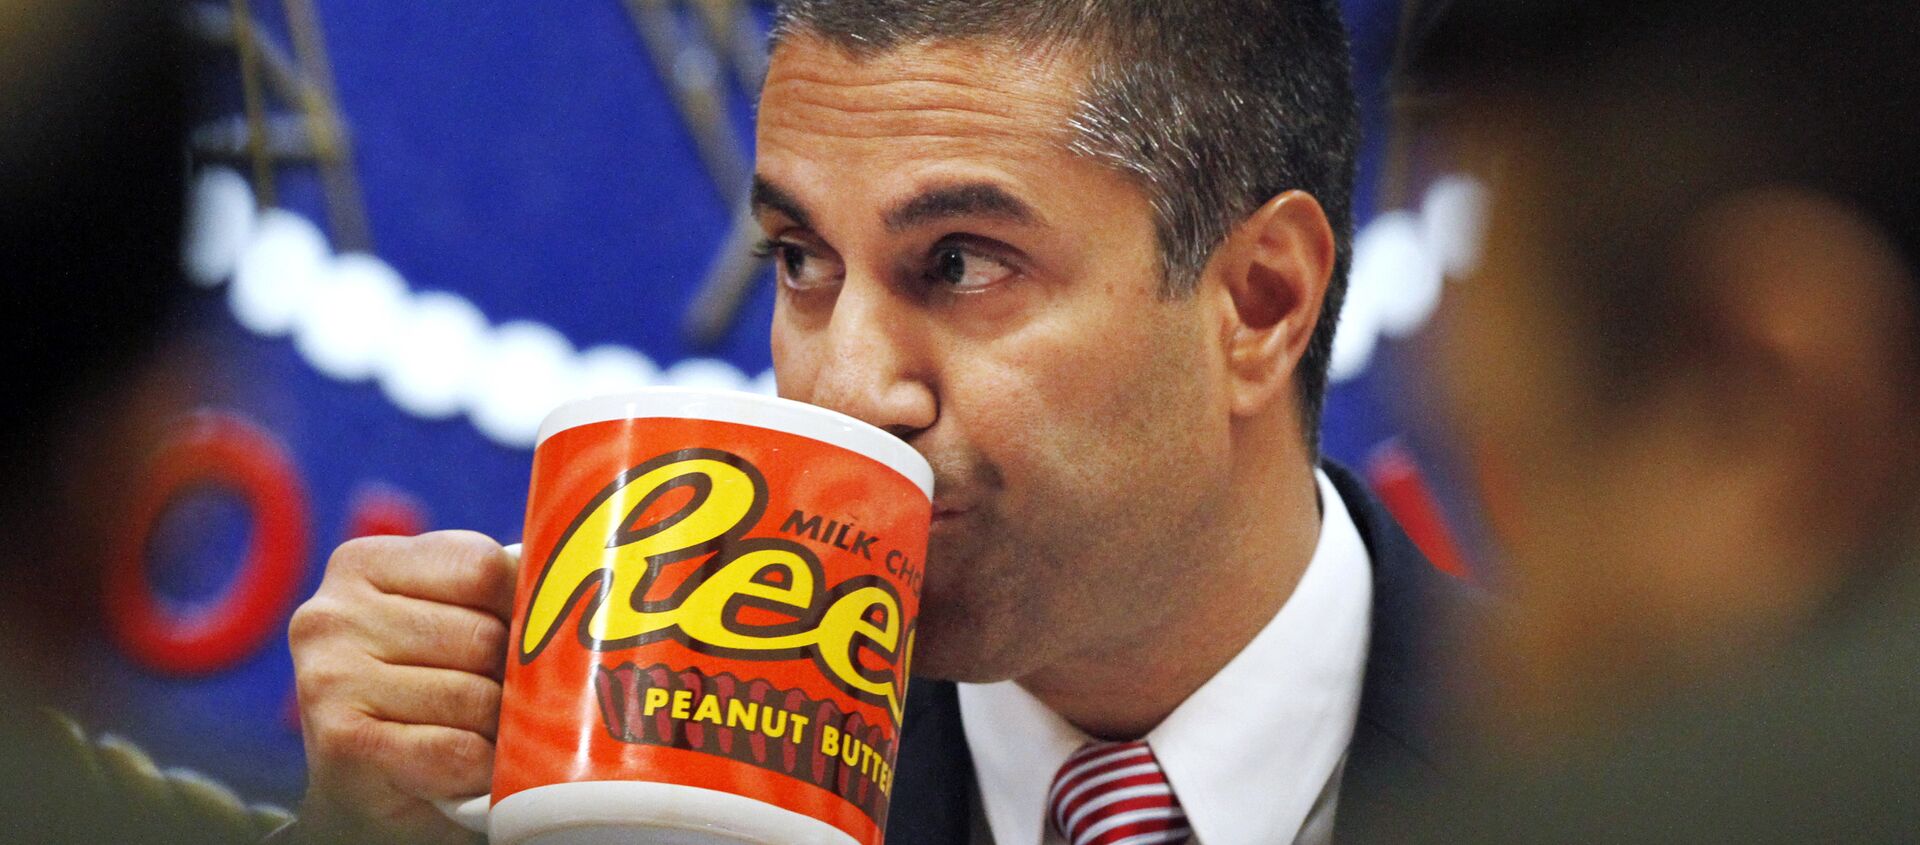 Federal Communications Commission (FCC) Chairman Ajit Pai takes a drink from a mug during an FCC meeting where the FCC voted on net neutrality, in Washington.  - Sputnik International, 1920, 06.11.2019